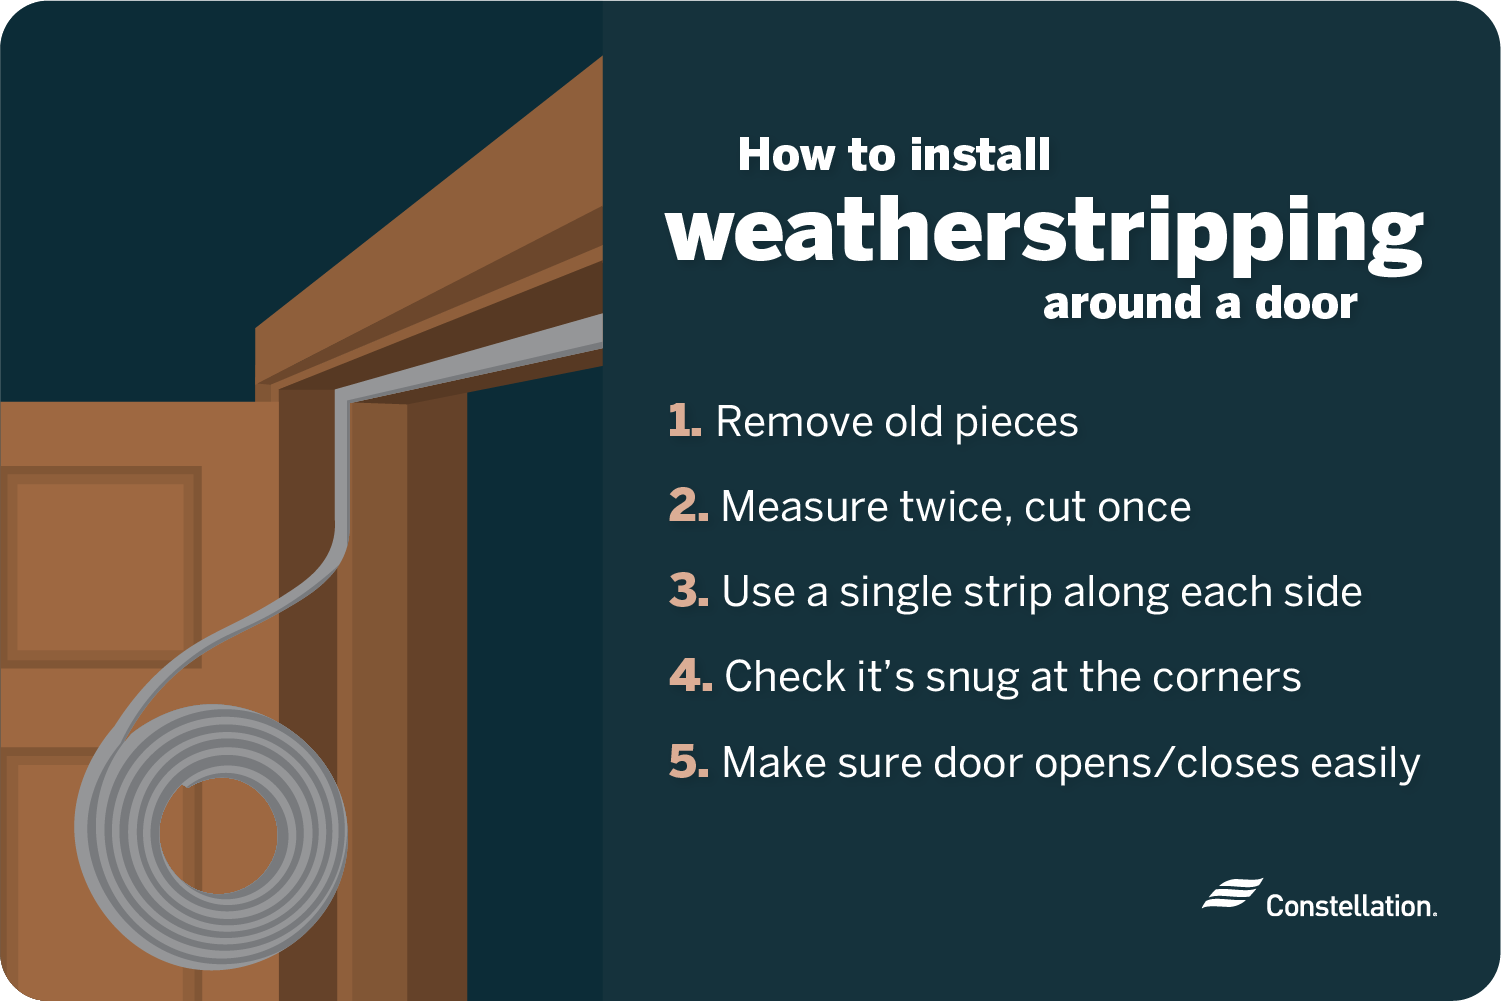 How to install weatherstripping around a door